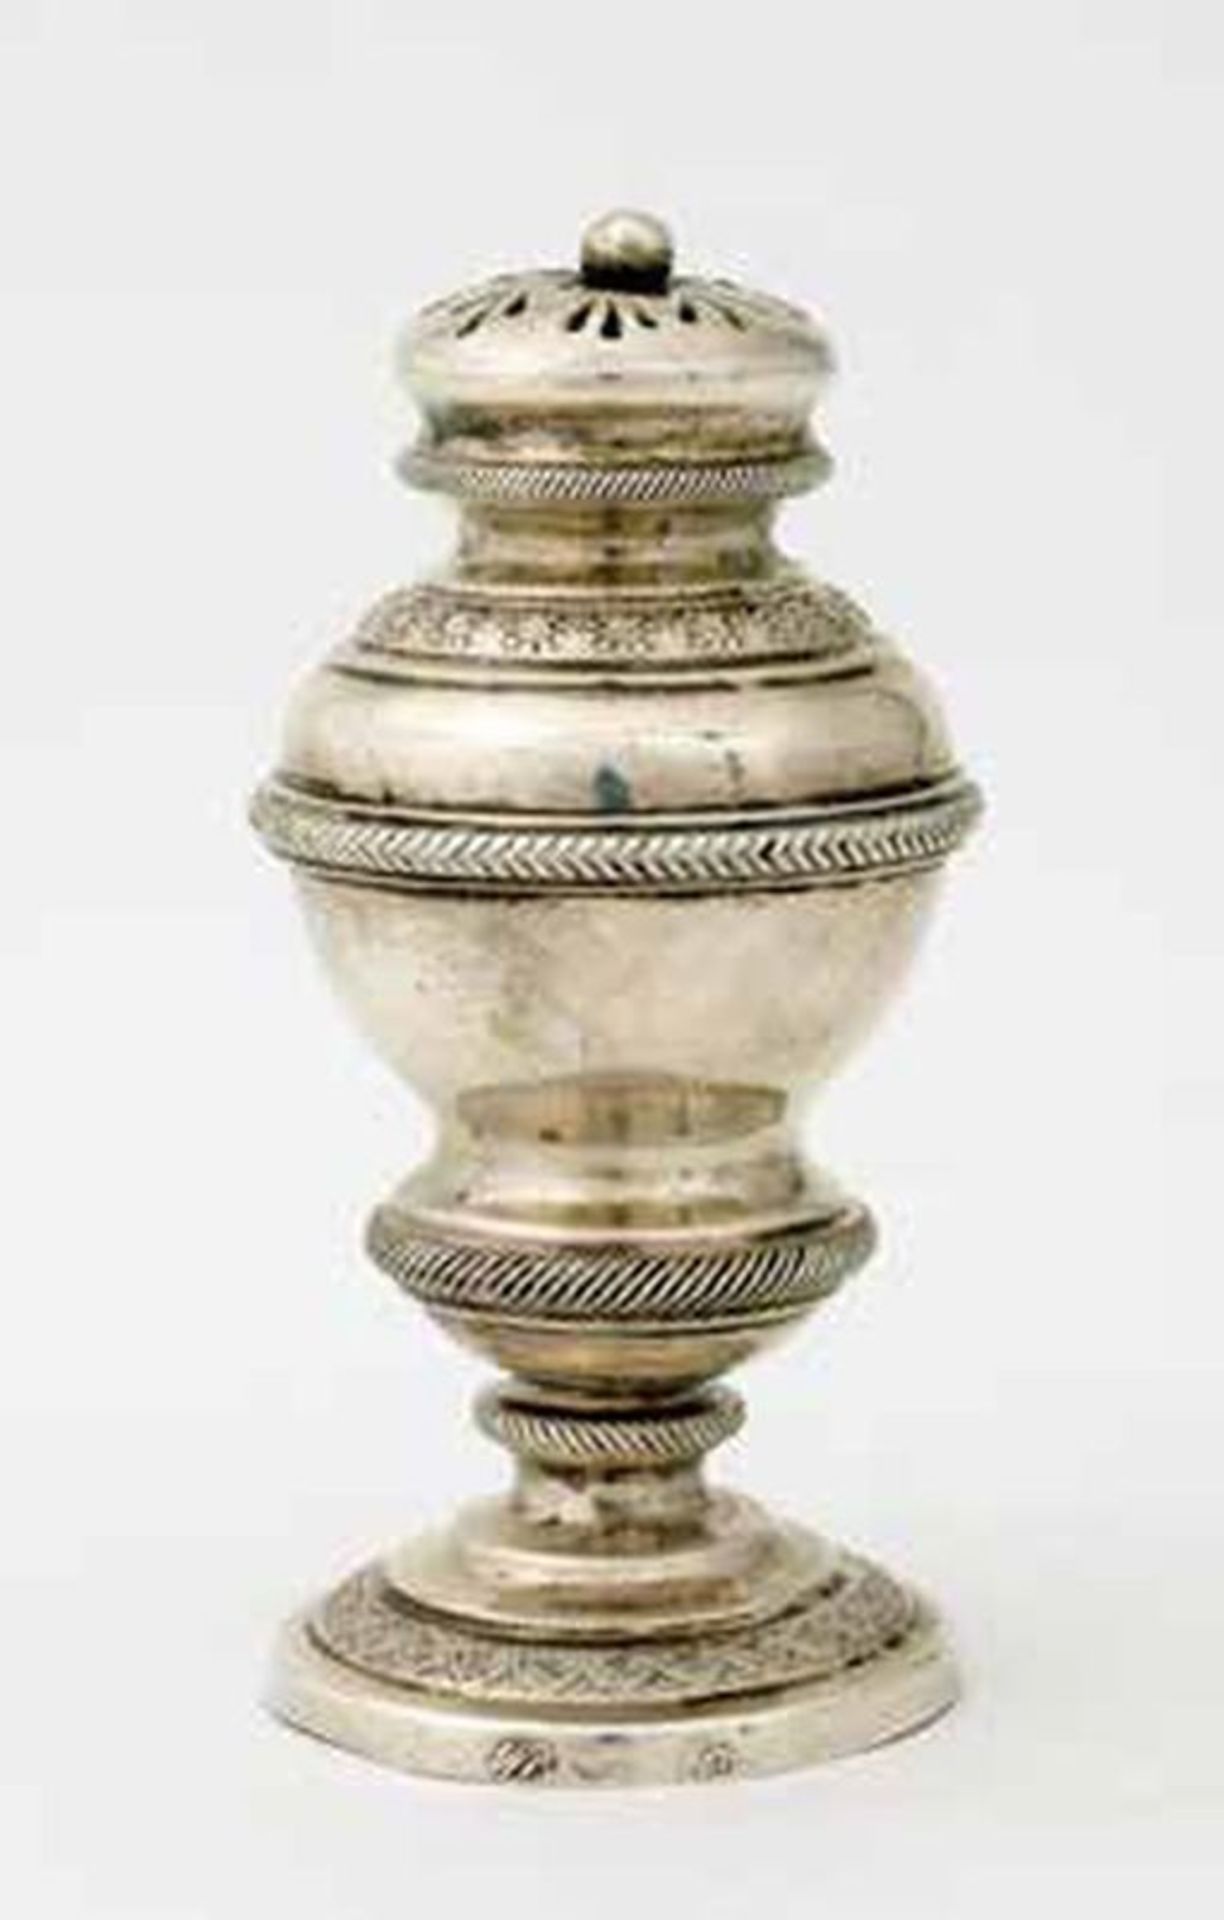 Spice tower dating from the XIXth century, probably from Brno. - 55g. H 9.5cm - [...]